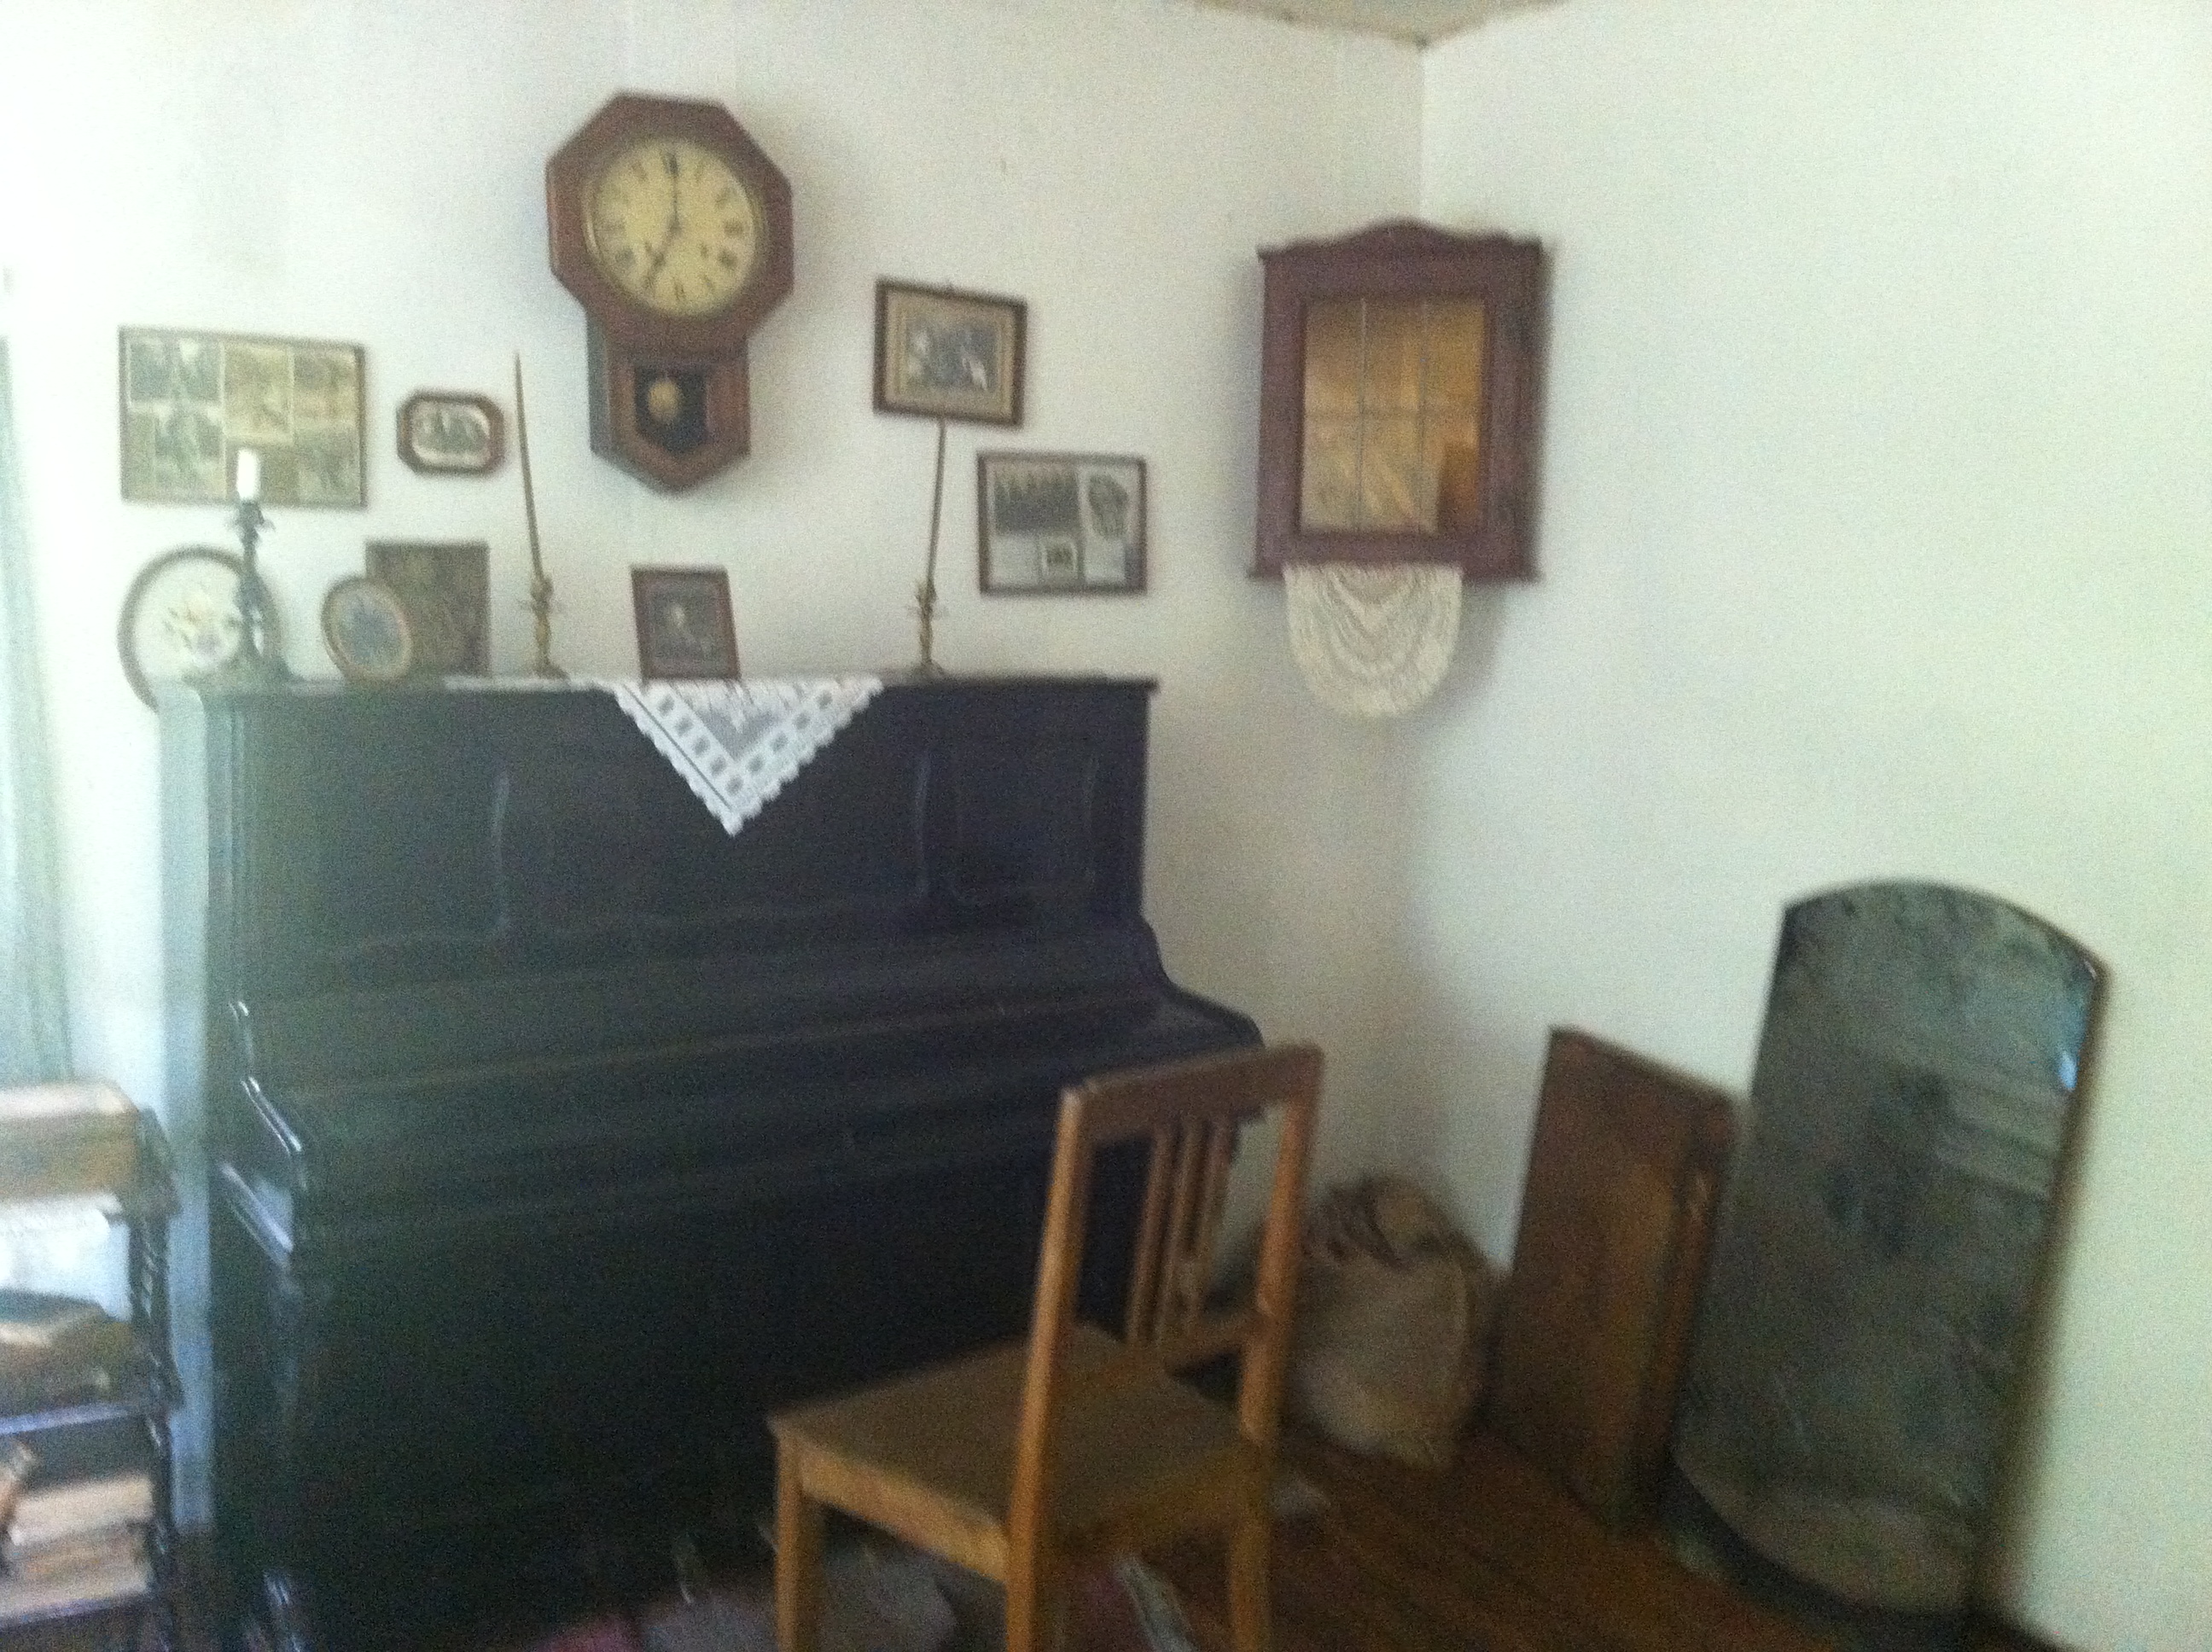 Inside of the house